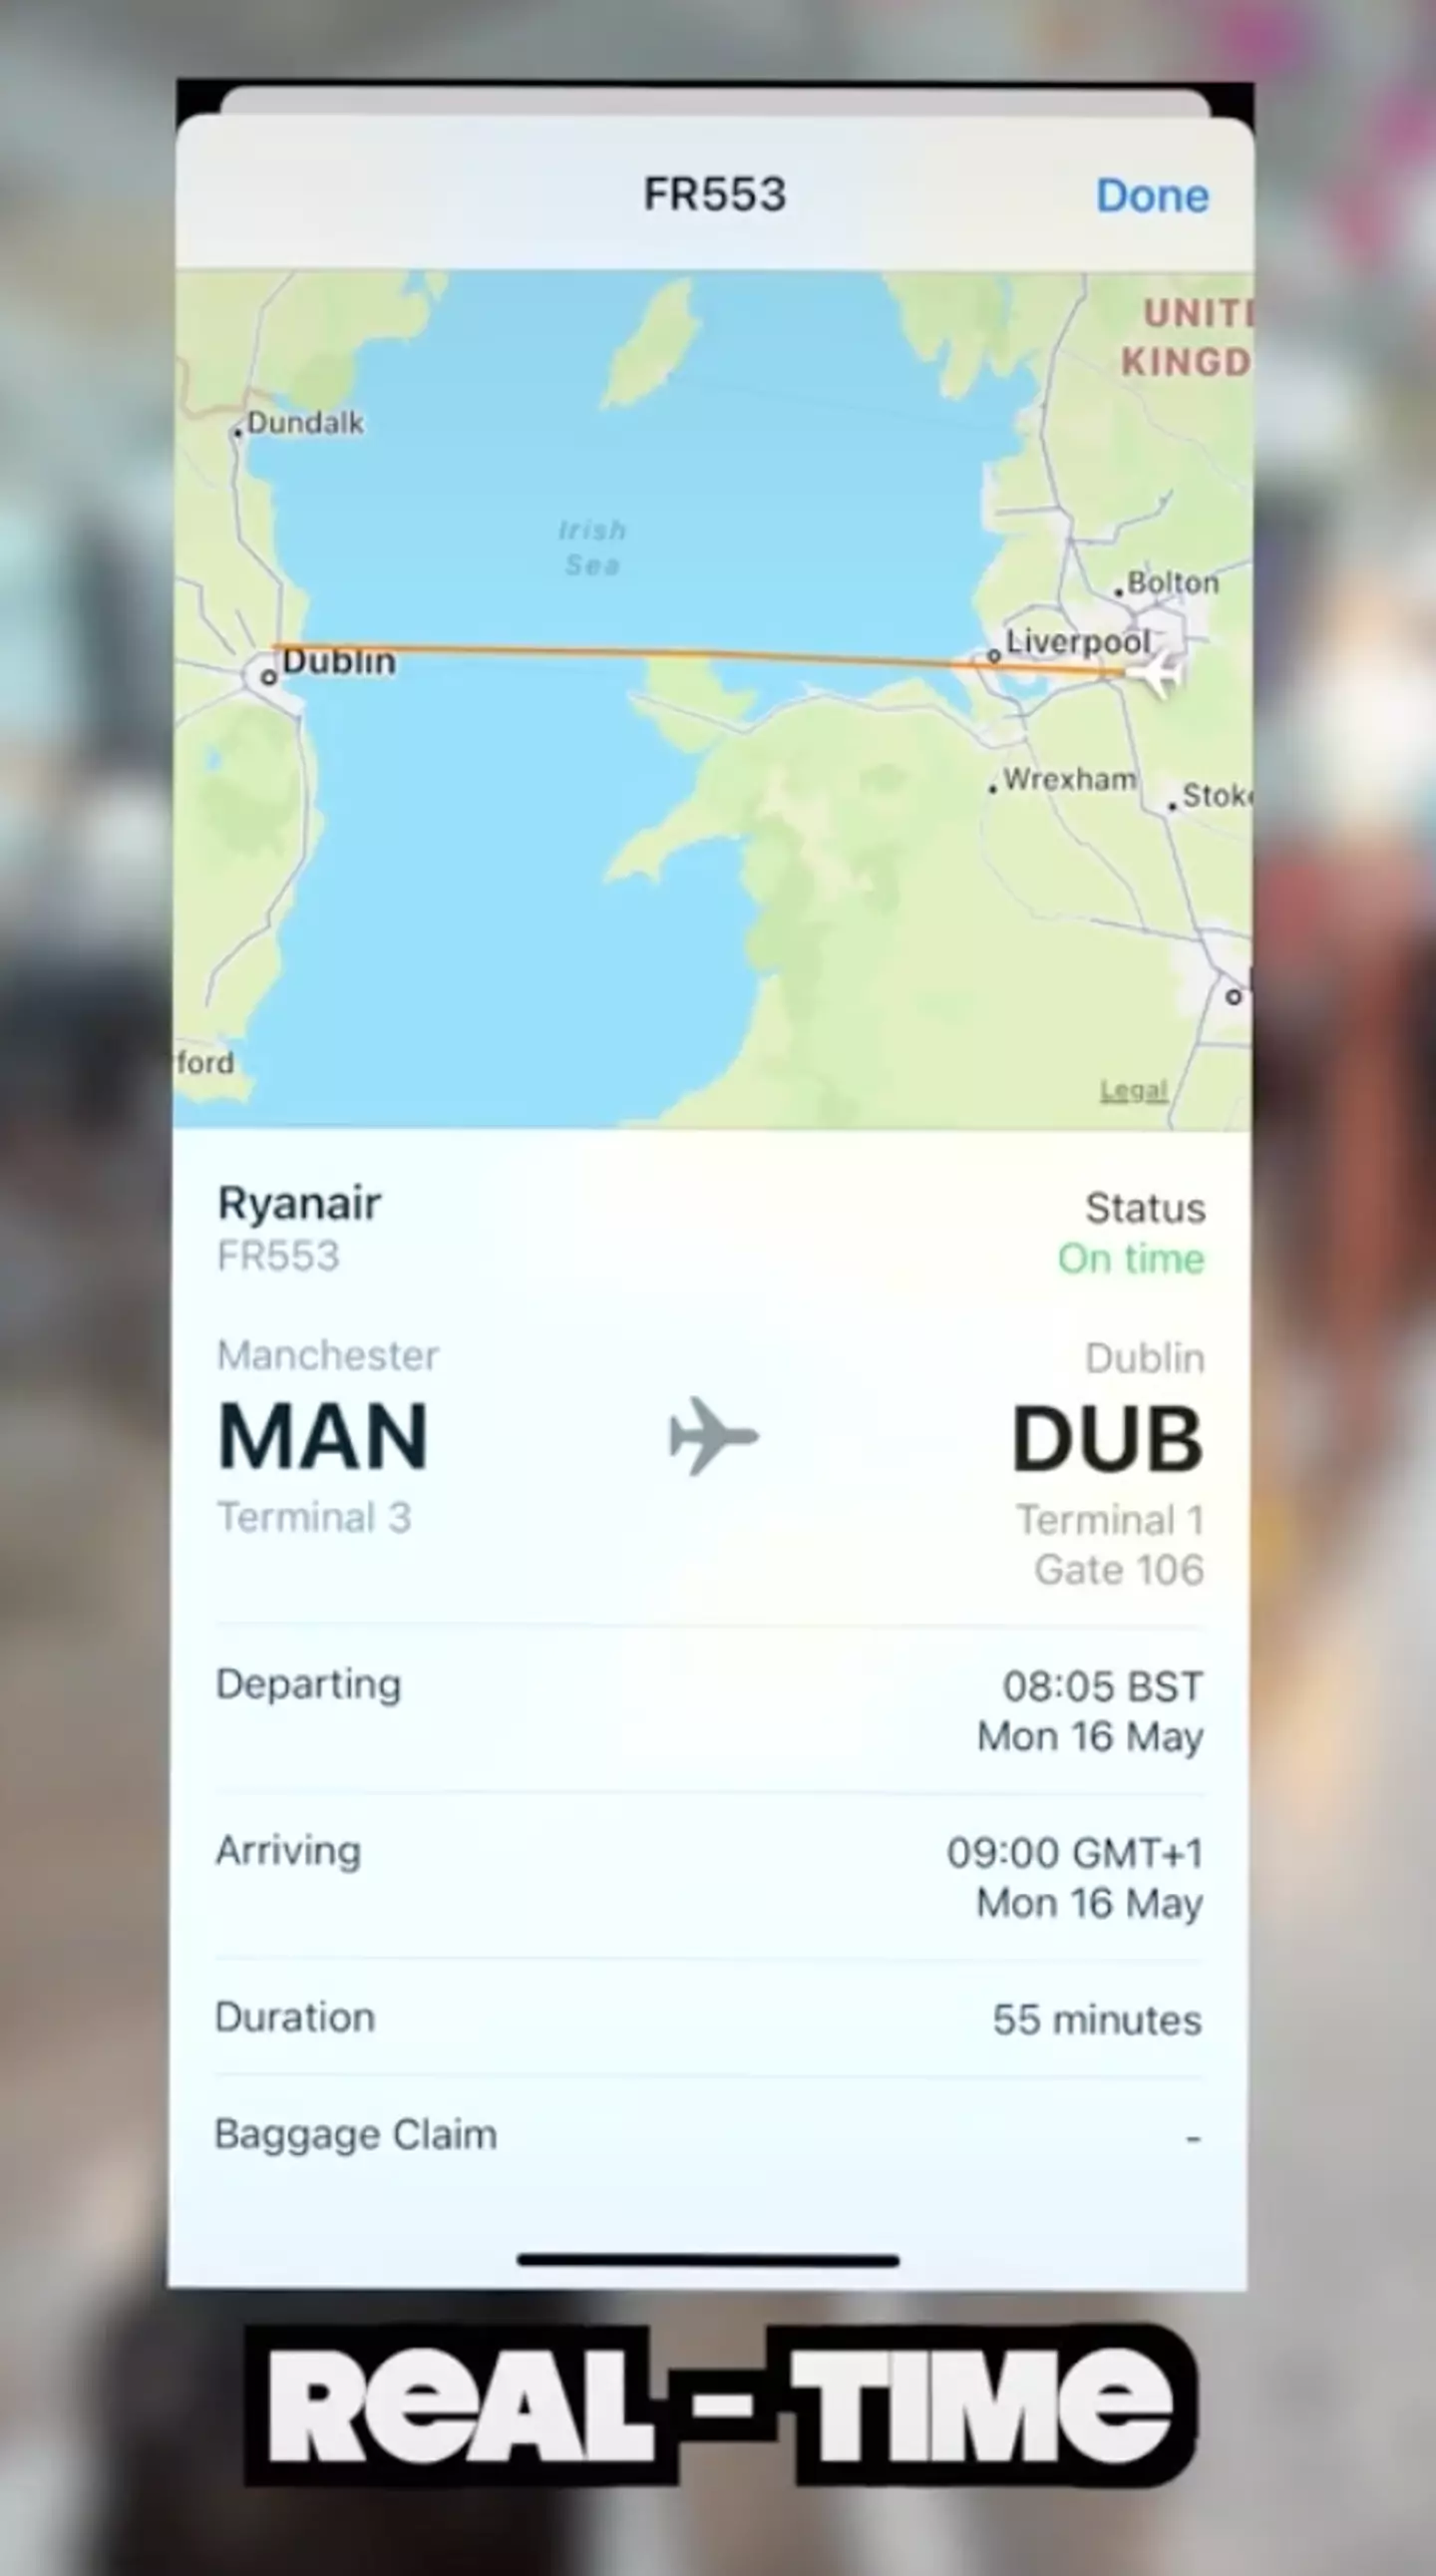 The recipient should be able to track the flight.